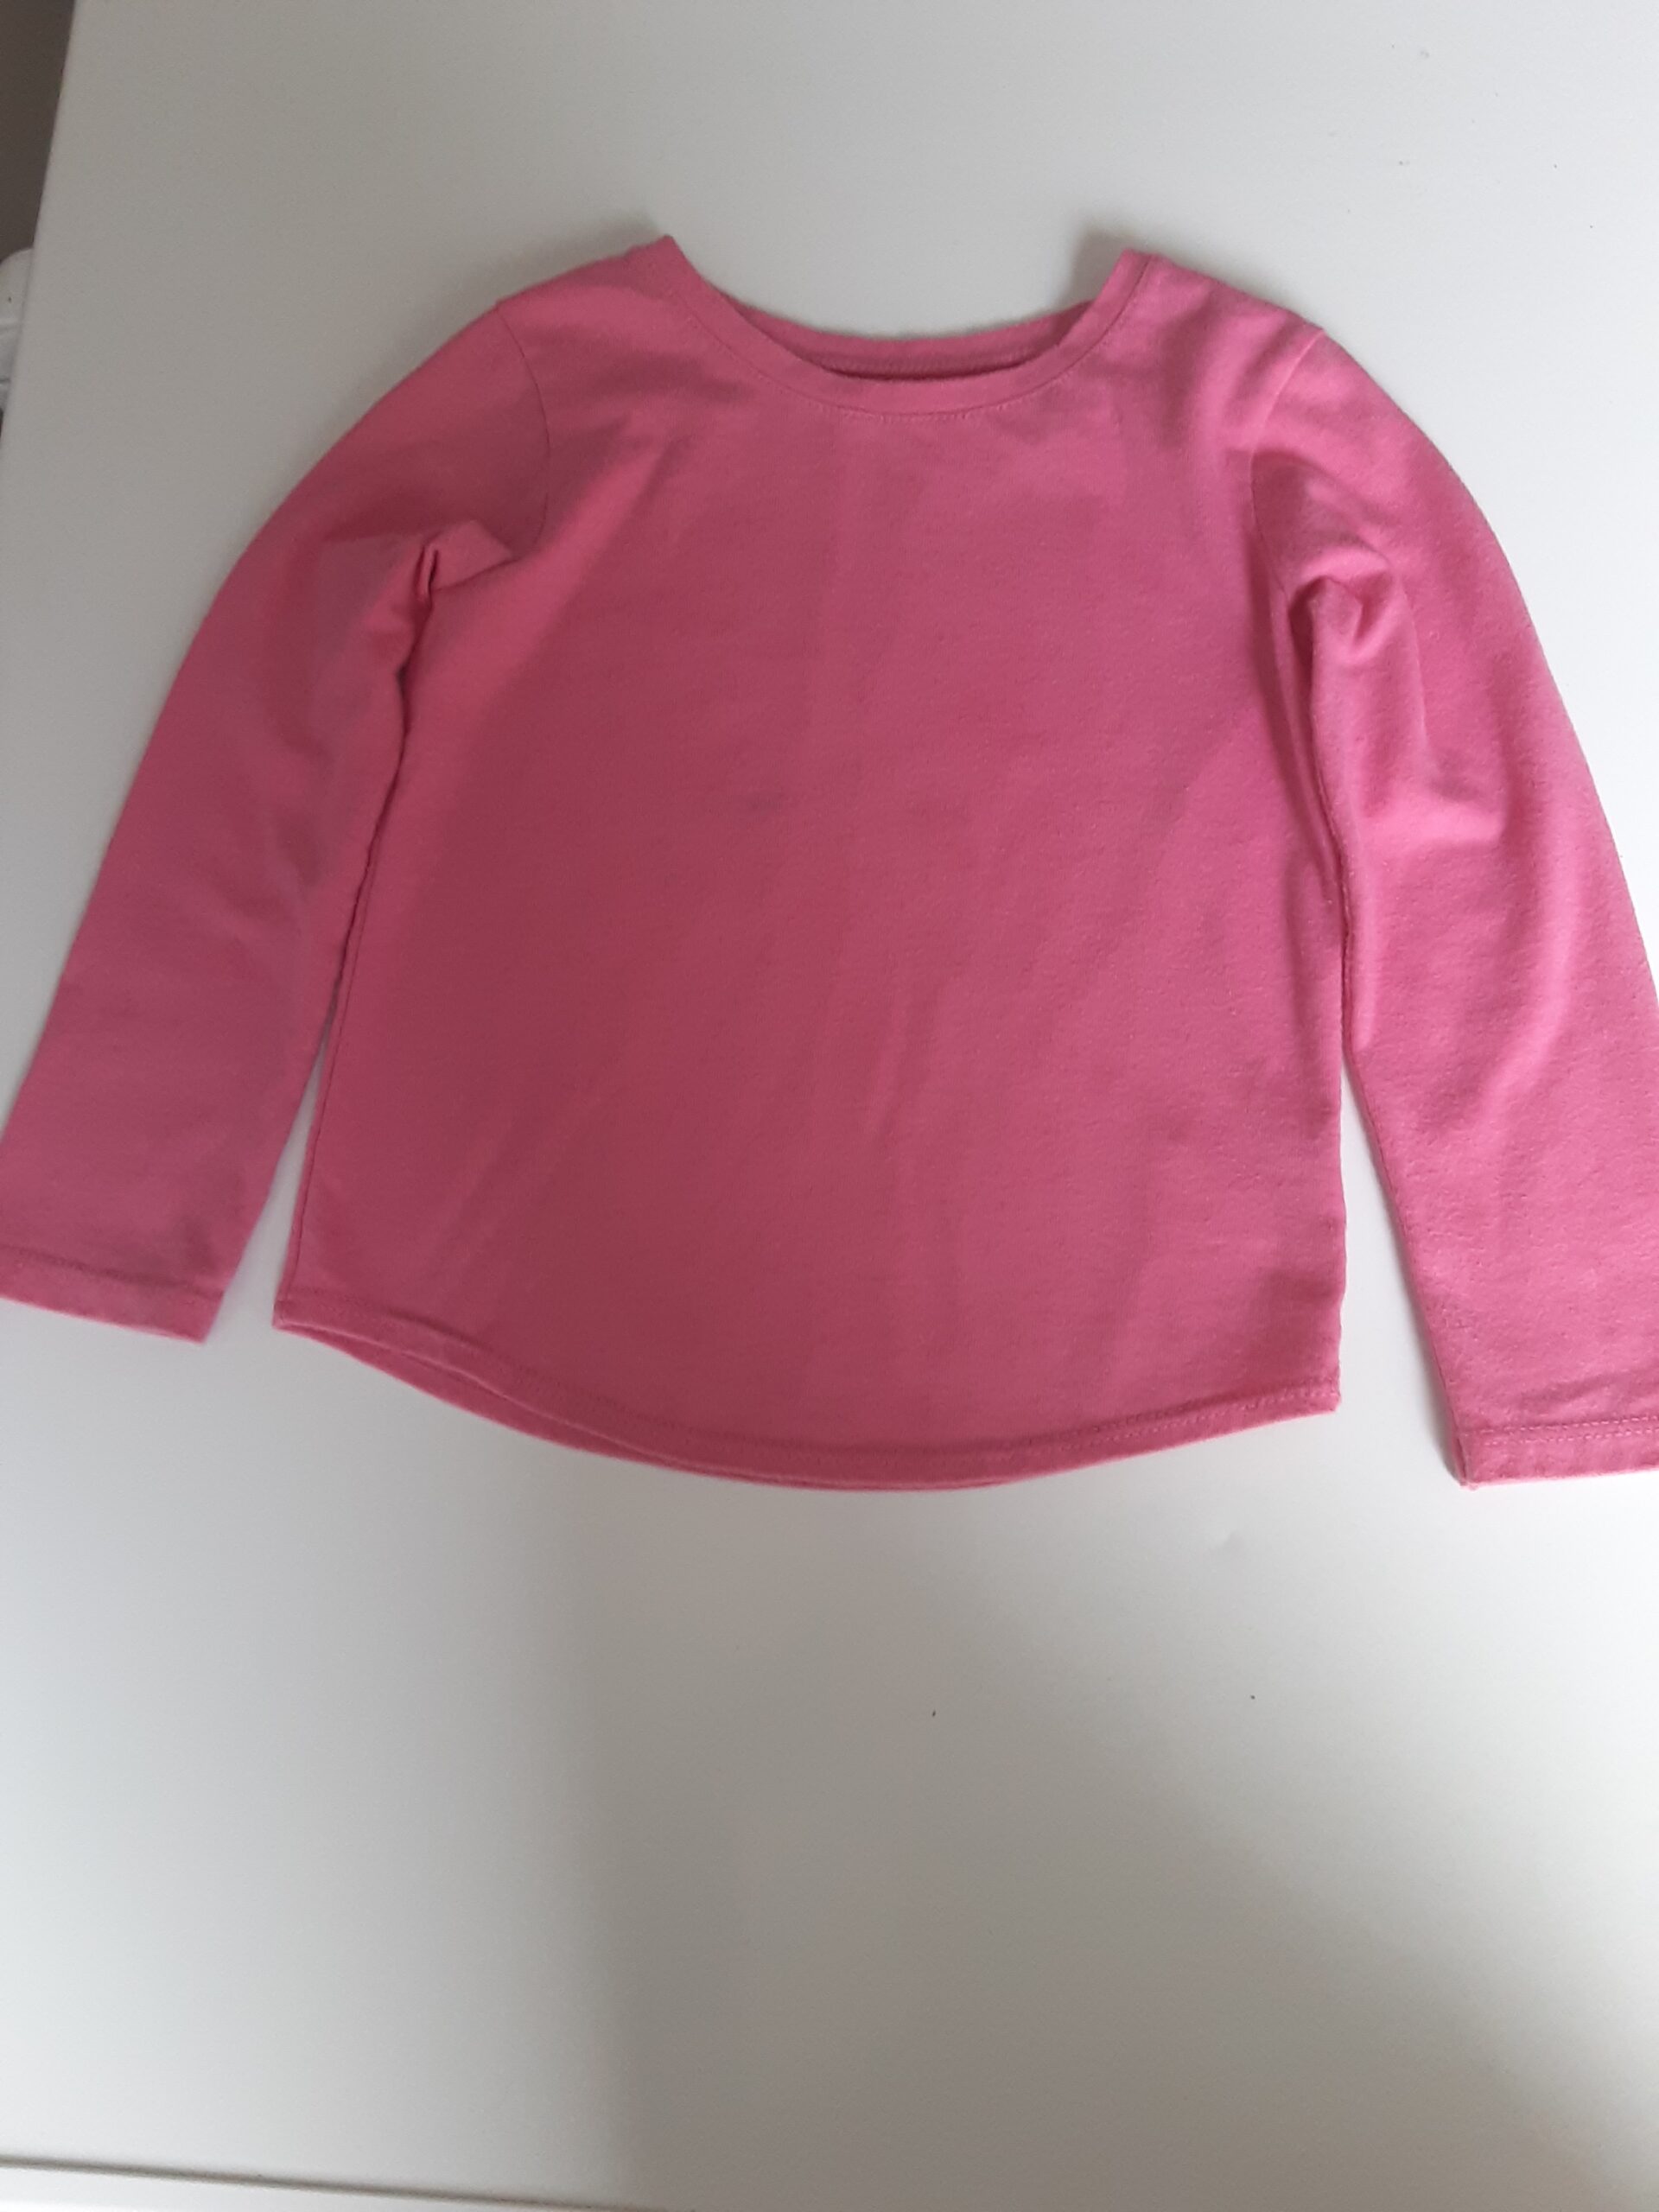 Long Sleeved pink blouse